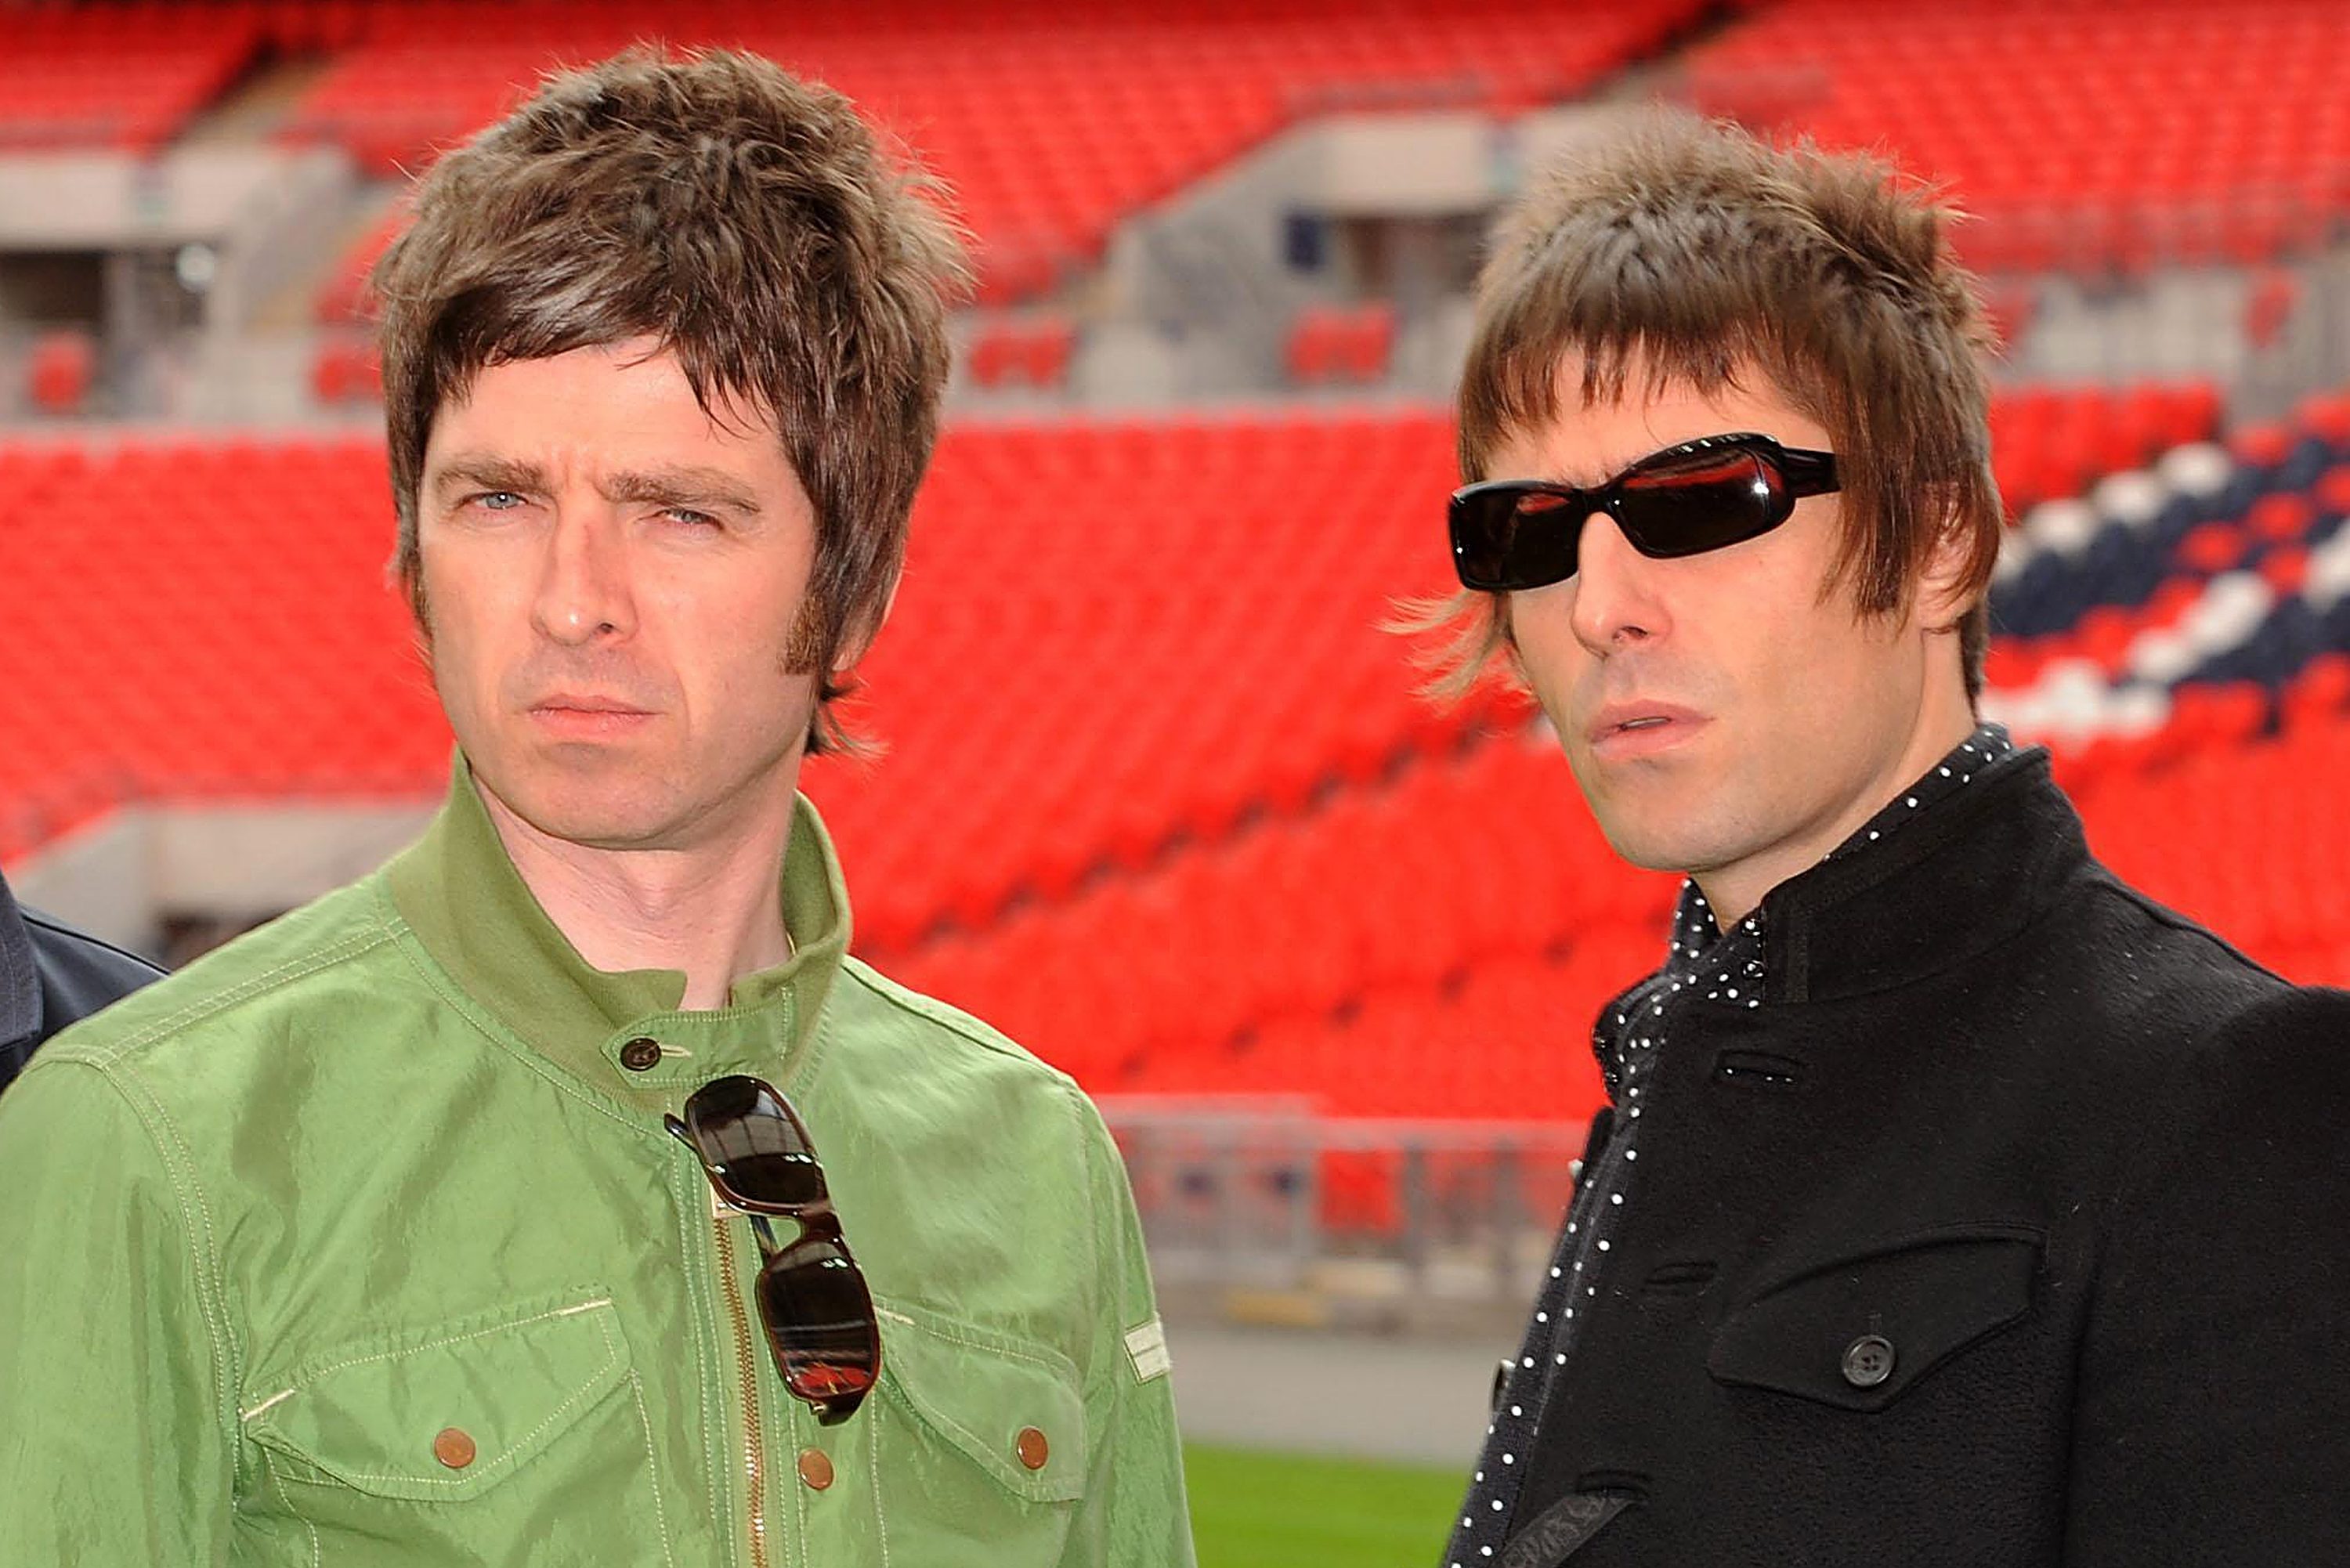 Noel Gallagher (left) and Liam Gallagher of Oasis pose at Wembley Stadium on October 16, 2008 in London, England.